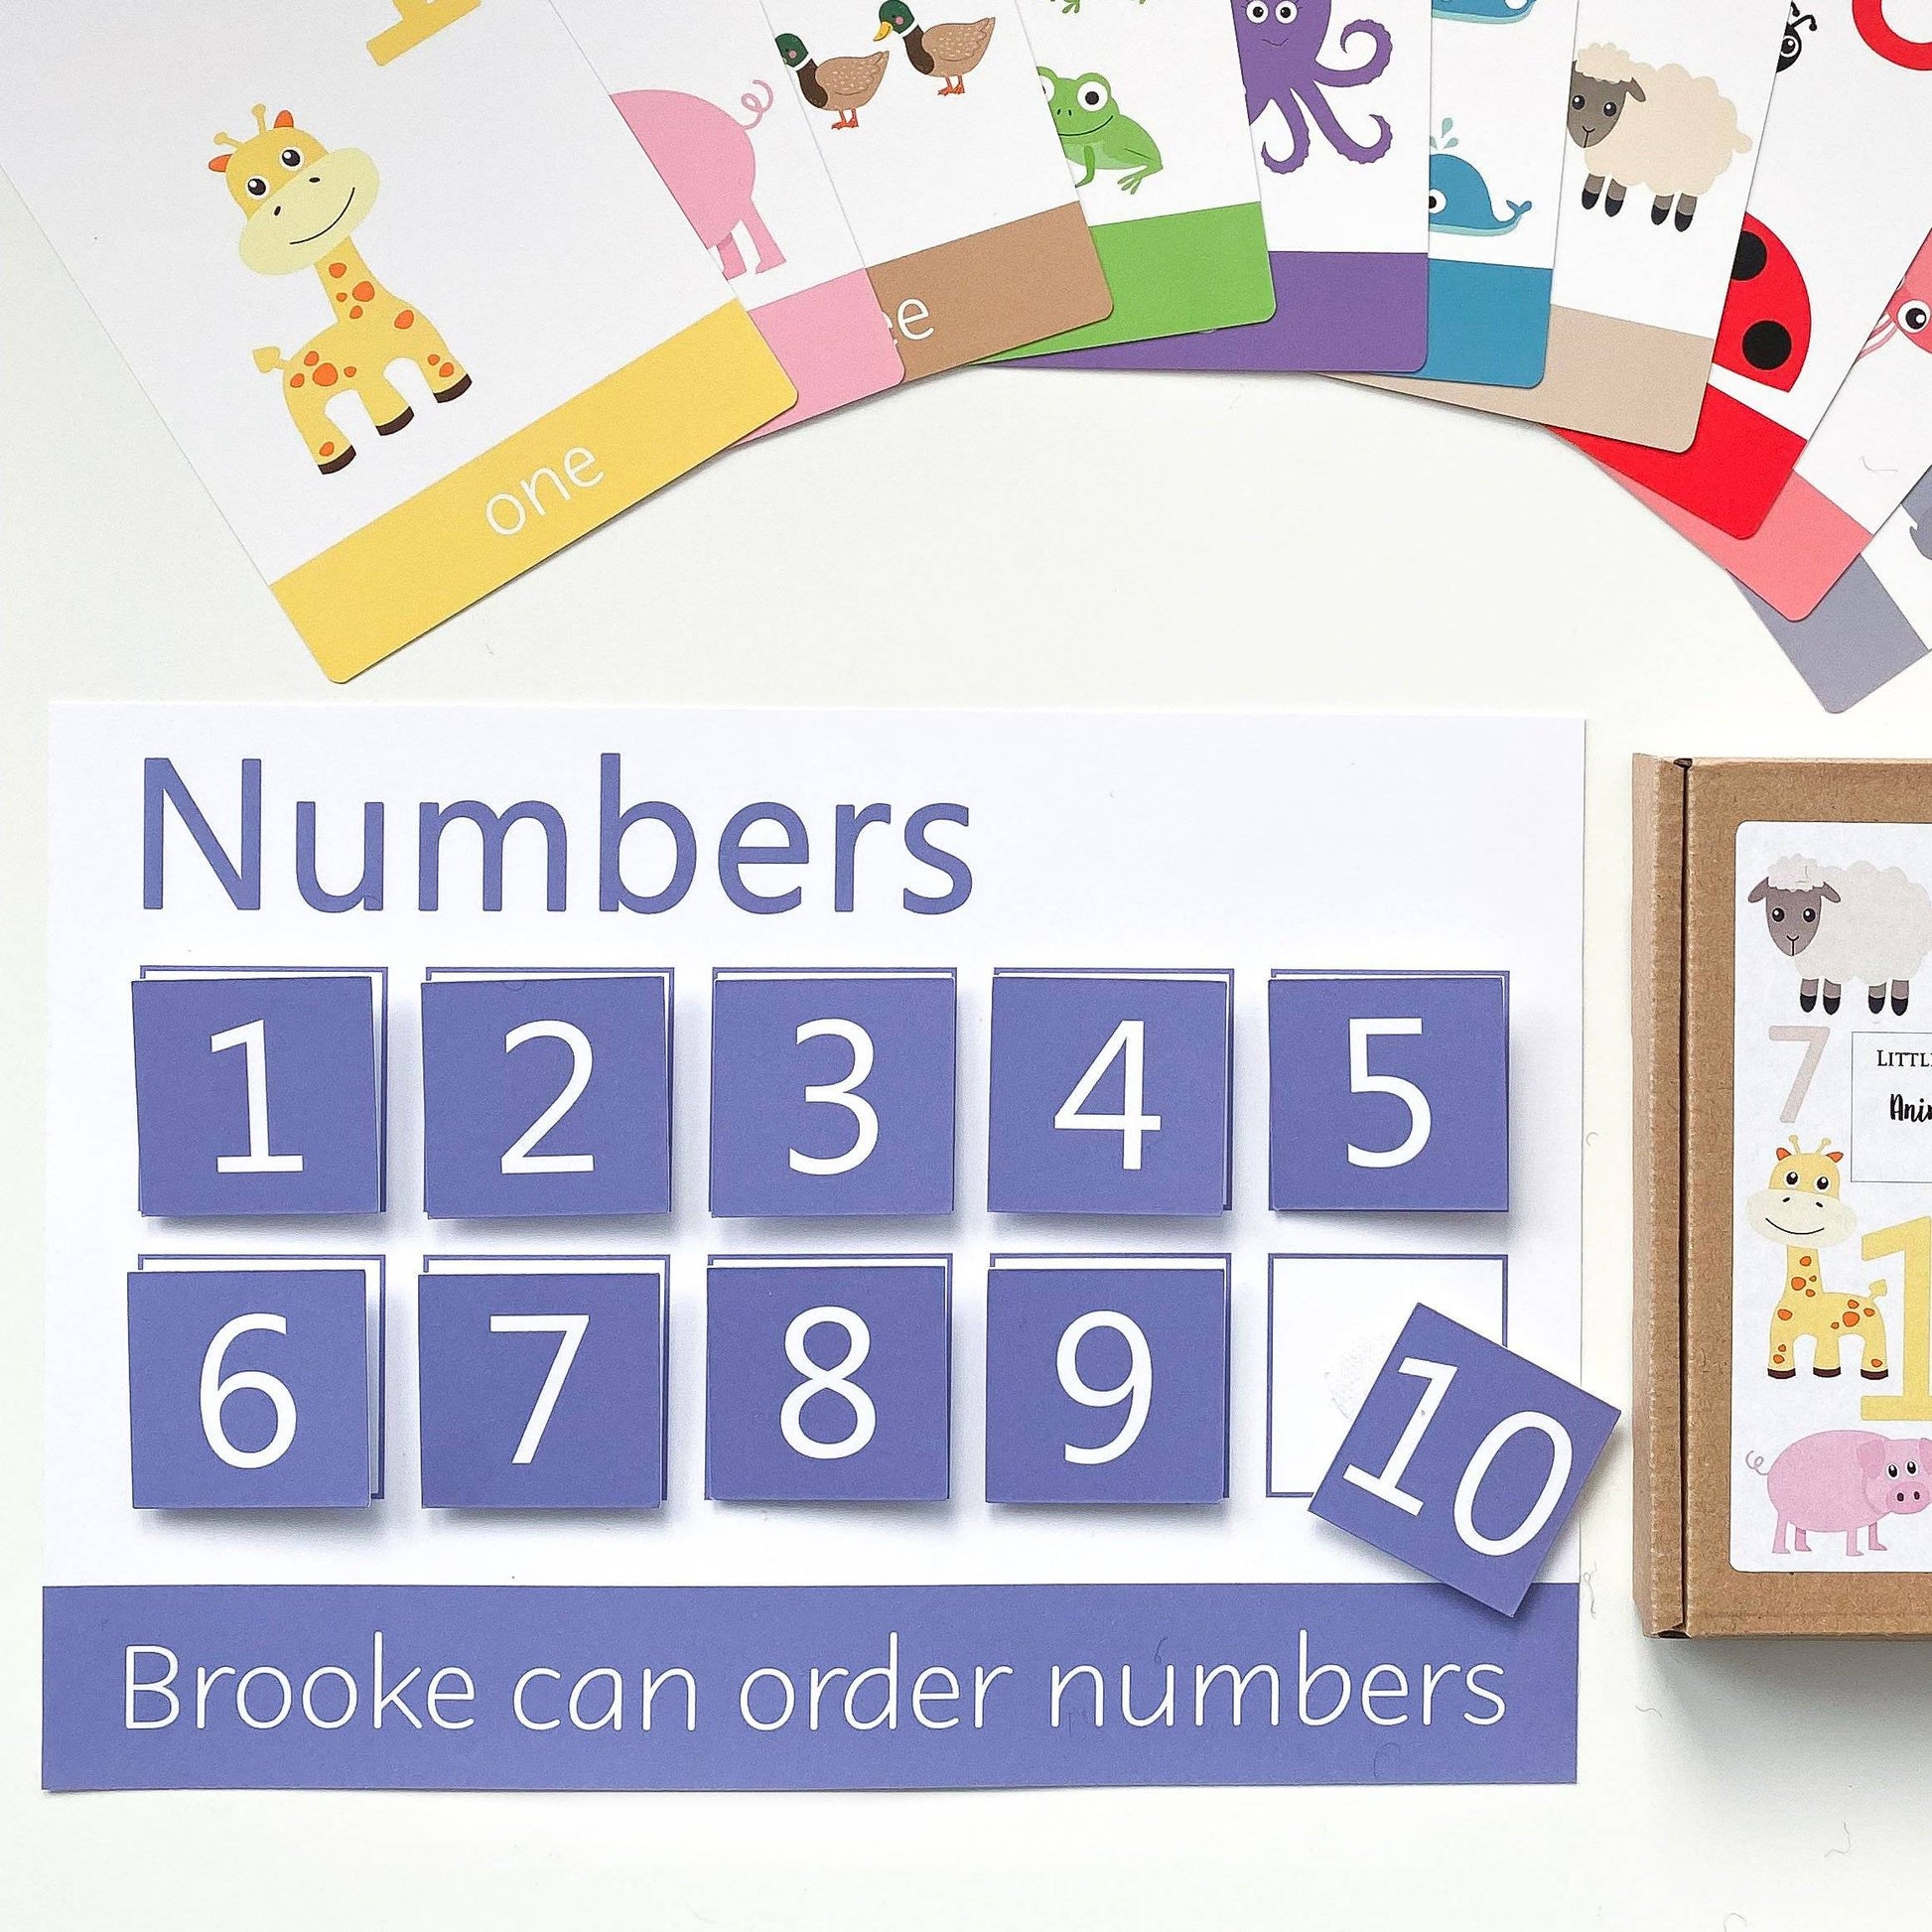 Personalised Numbers Learning Mat (Ordering)-Little Boo Learning-1-10,counting,maths,Numbers,numeracy